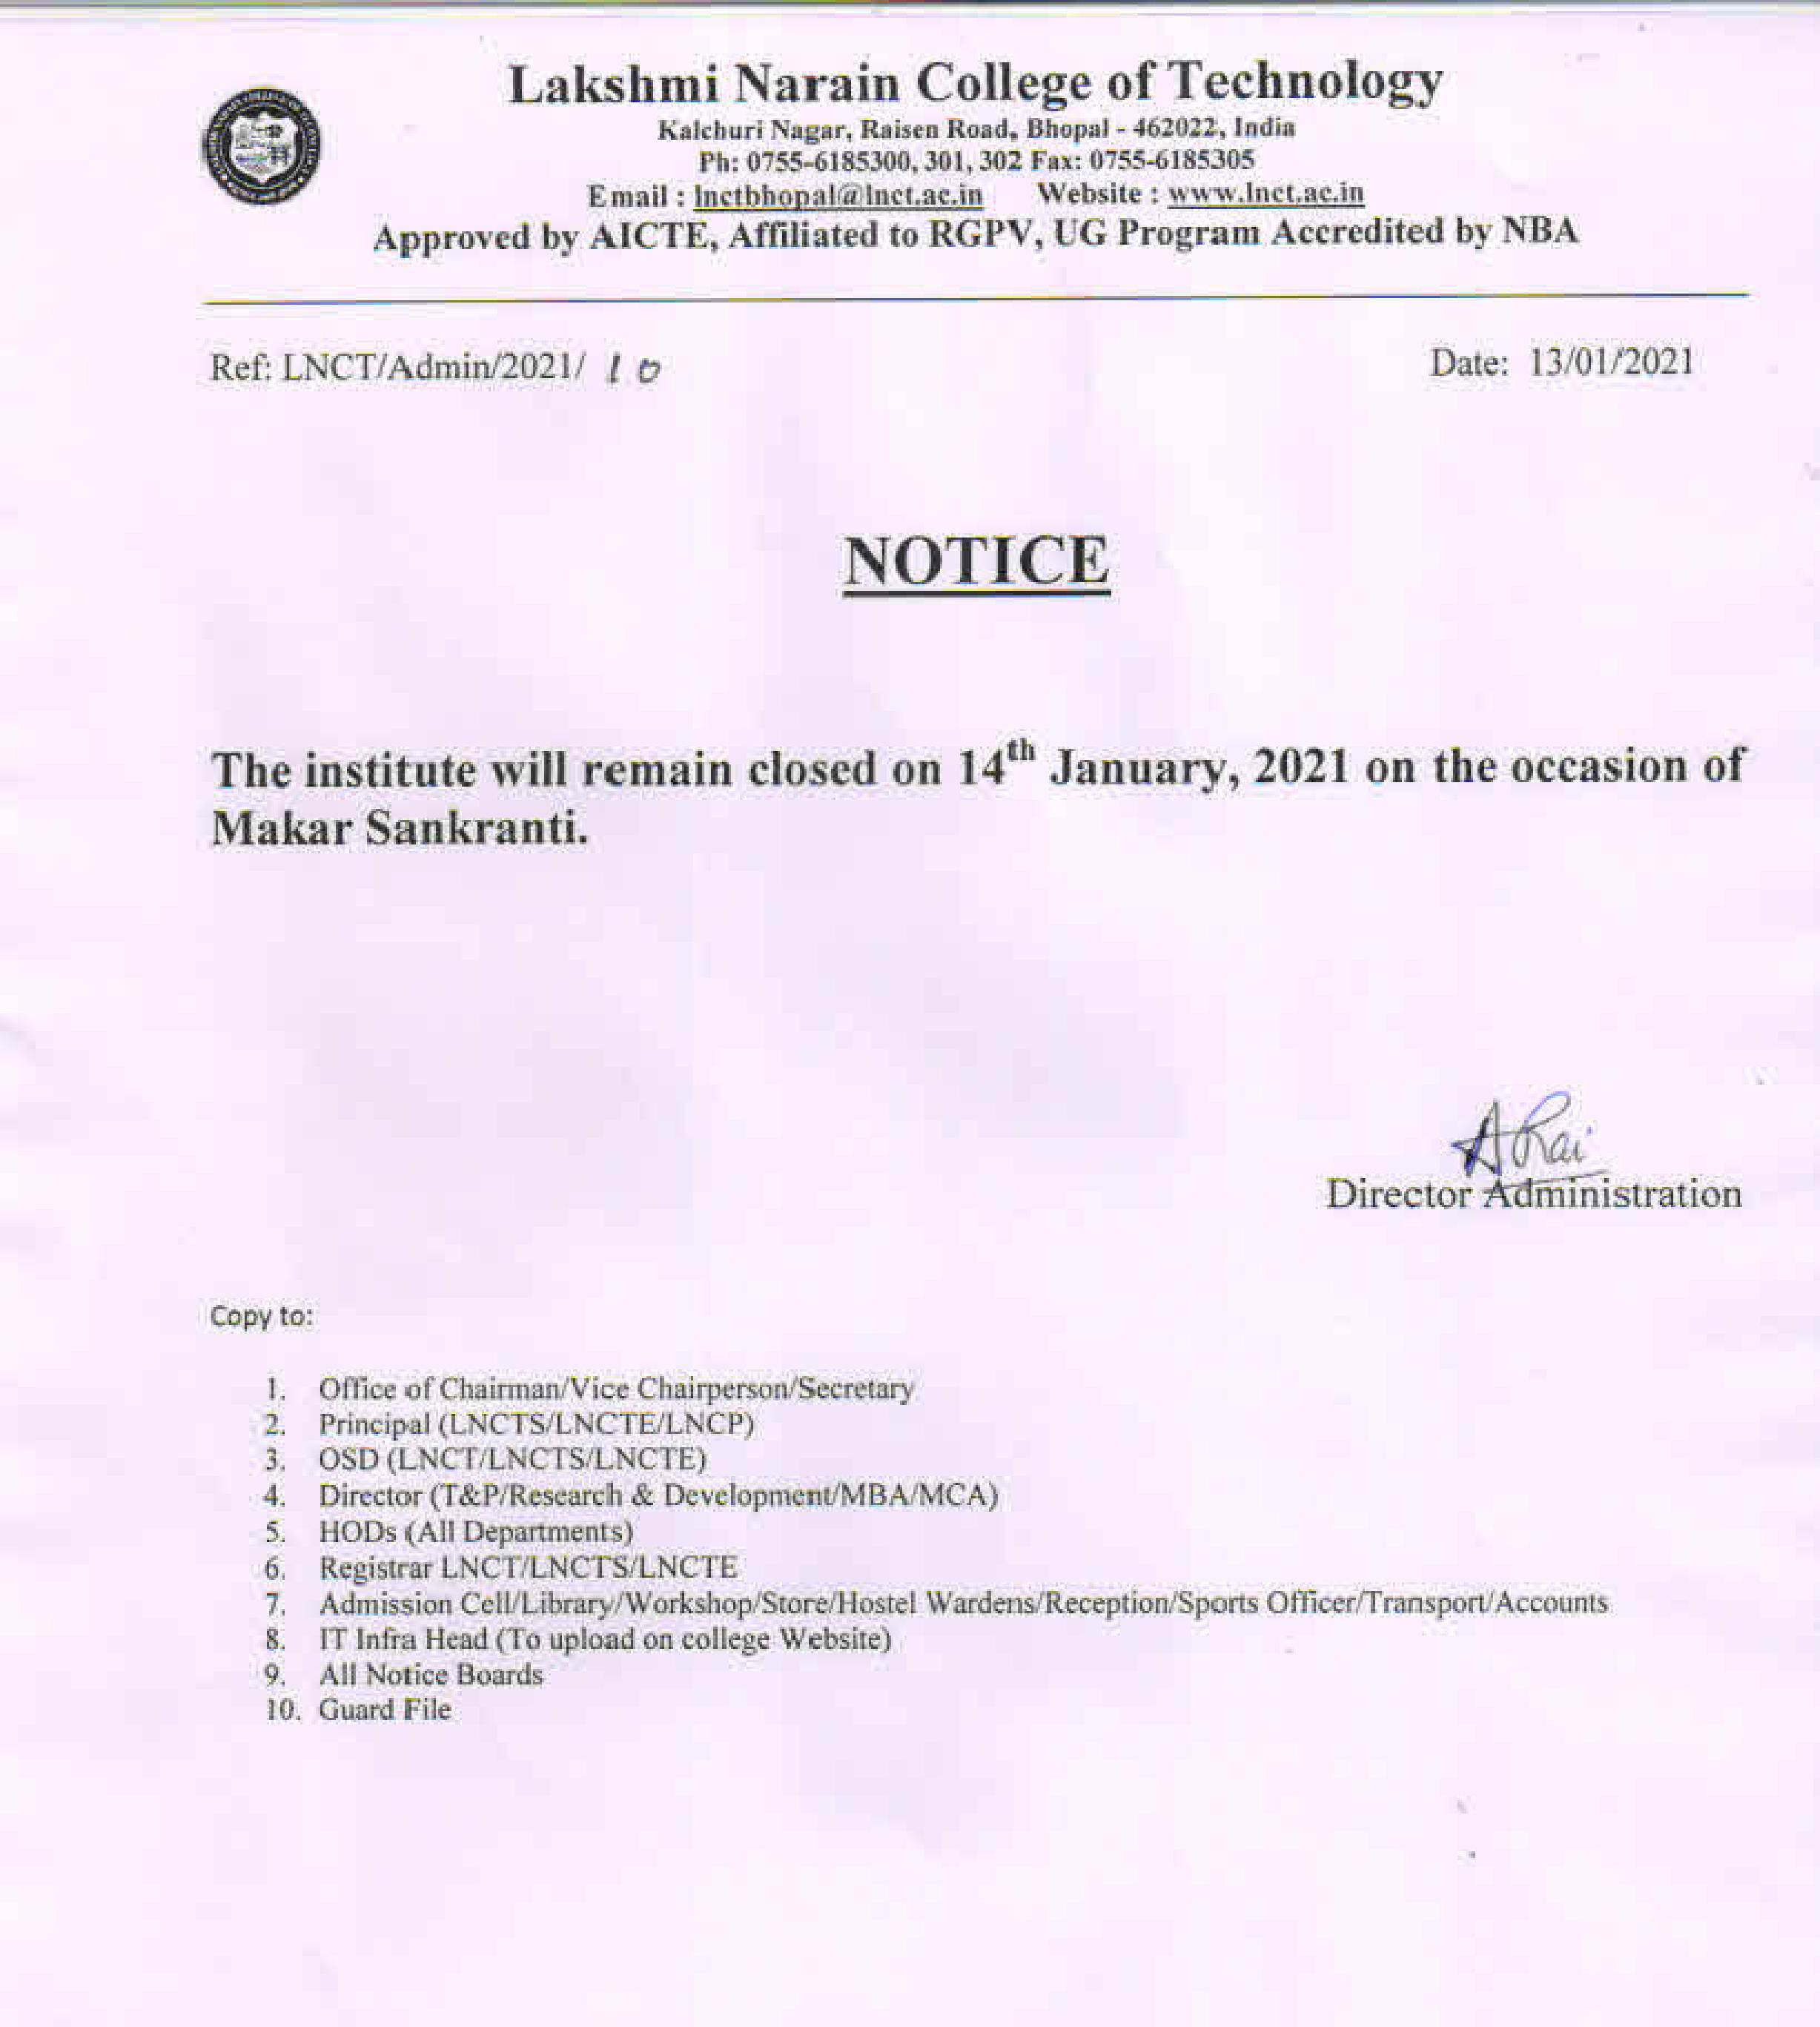 The Institute will remain closed on 14 January 2021 3